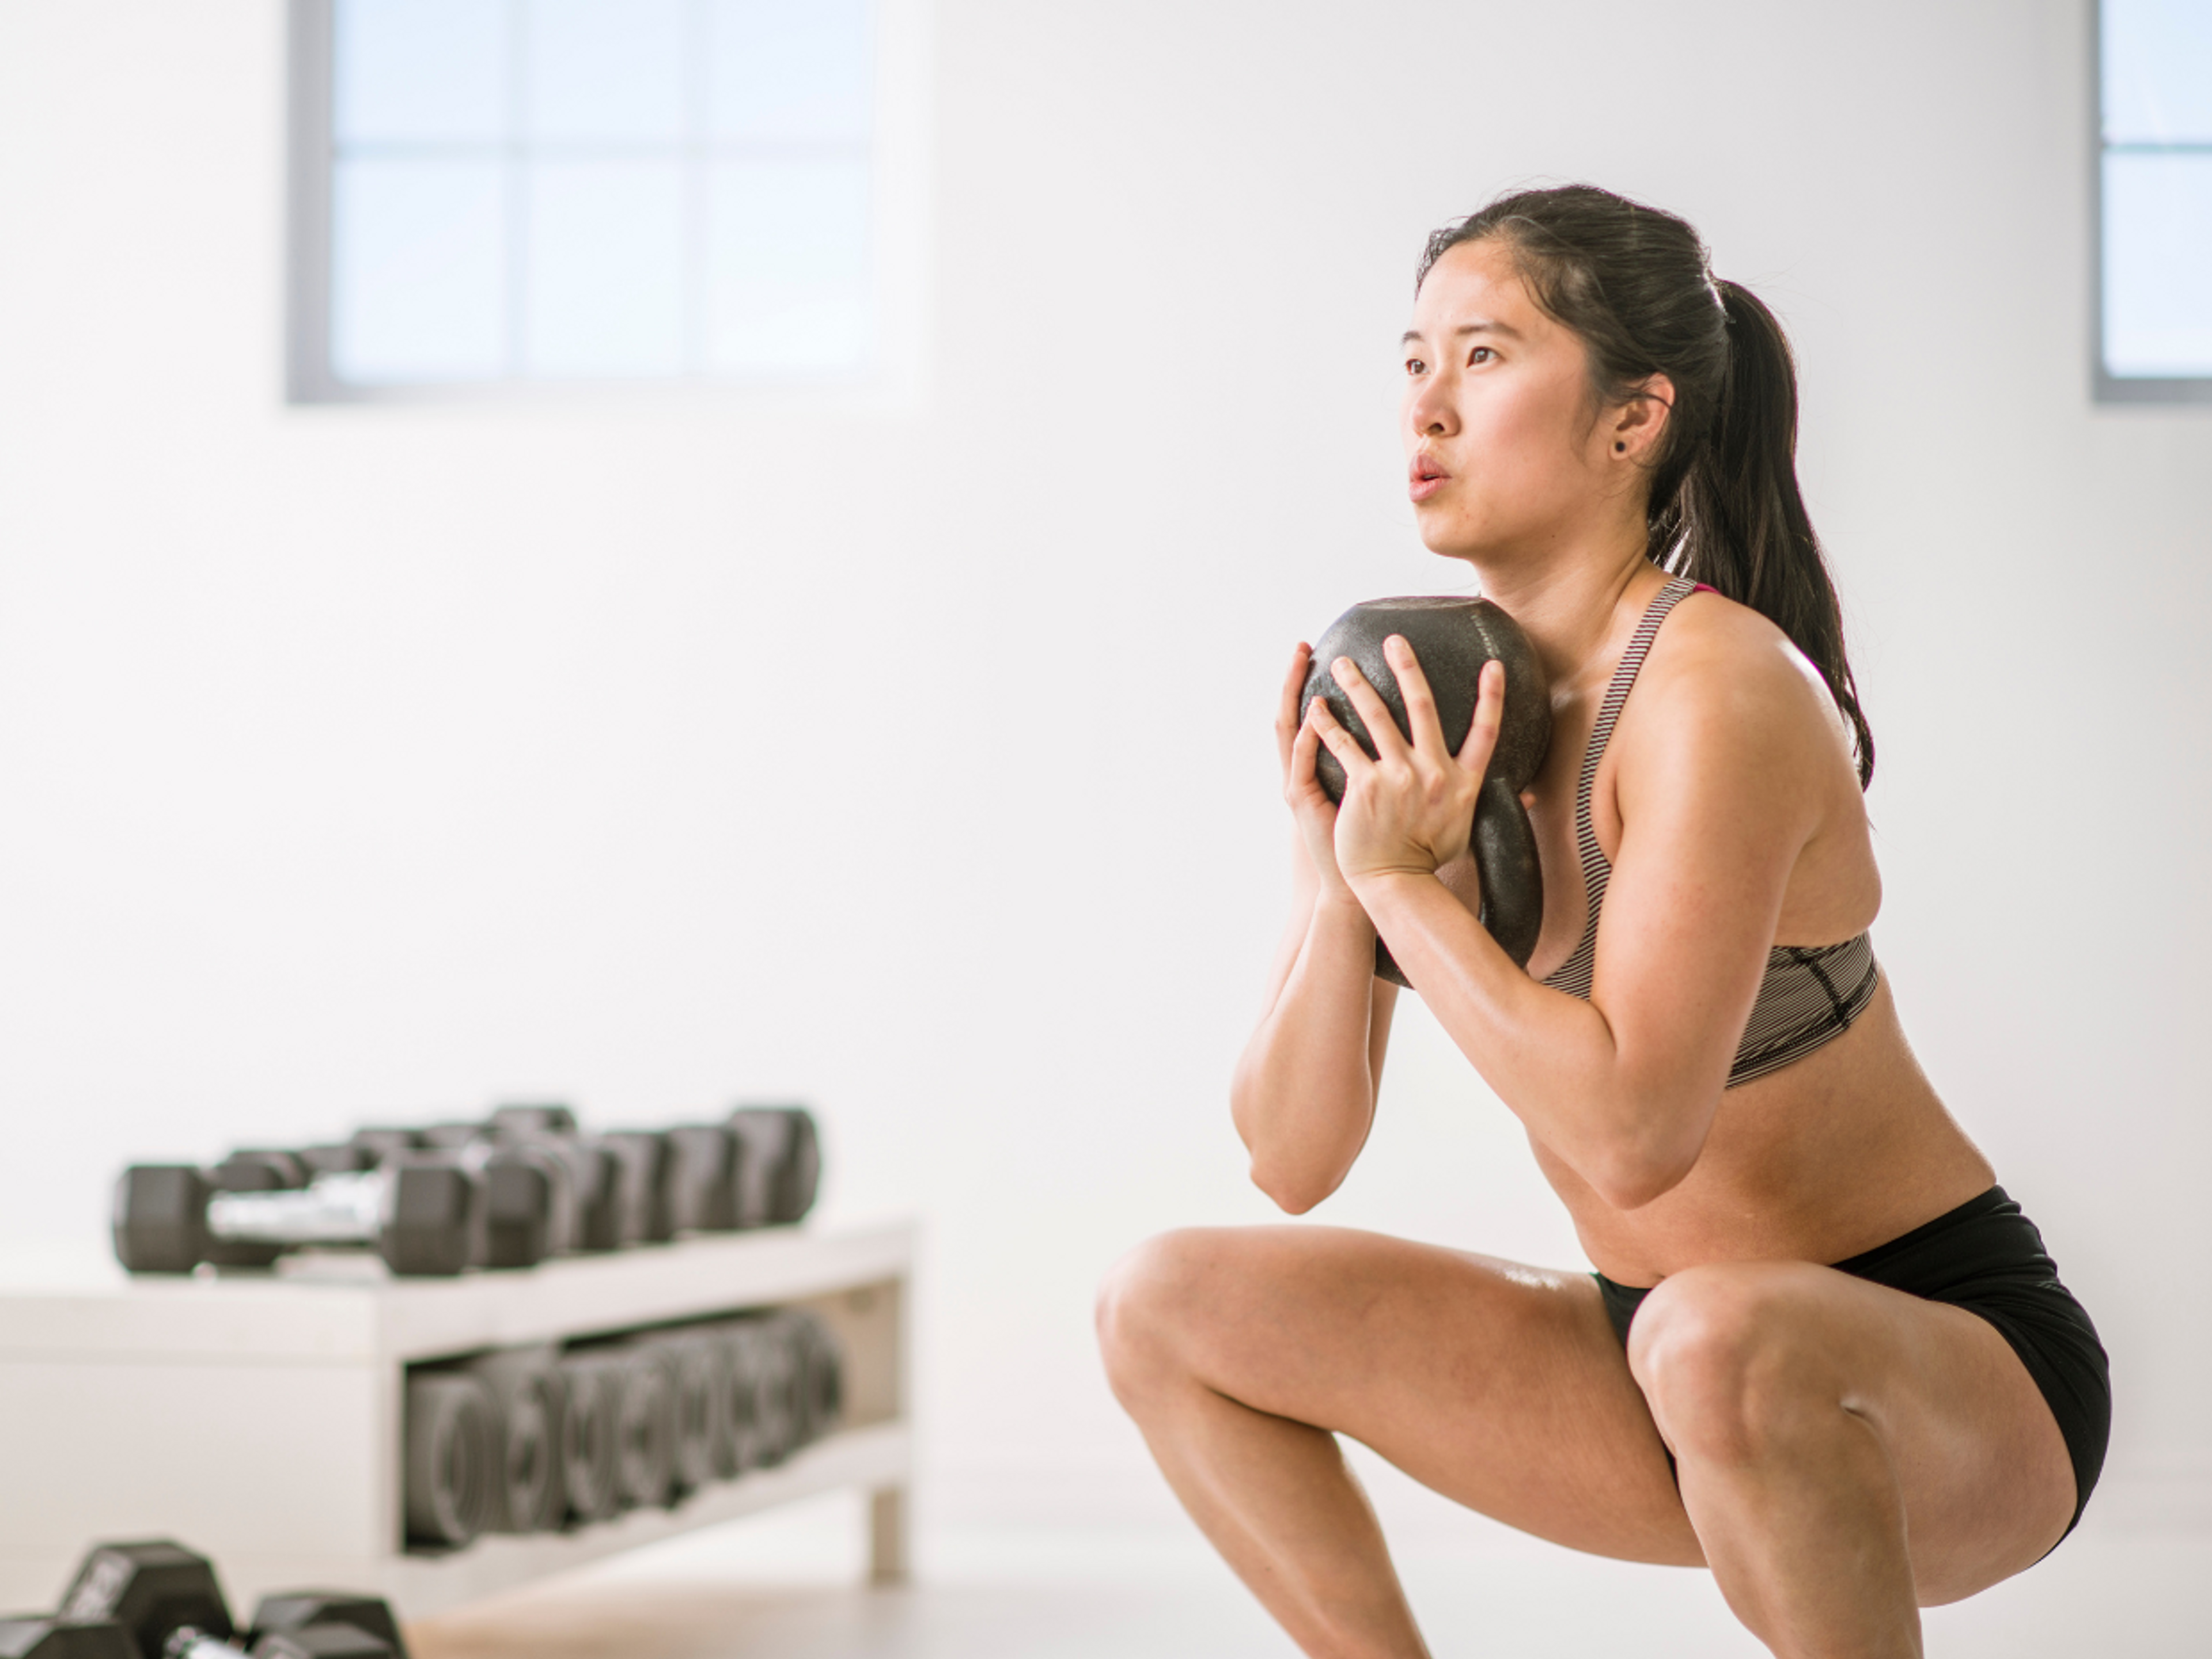 Exercises like deep squats often aggravate patellofemoral pain syndrome and are best avoided during the early rehab stages.